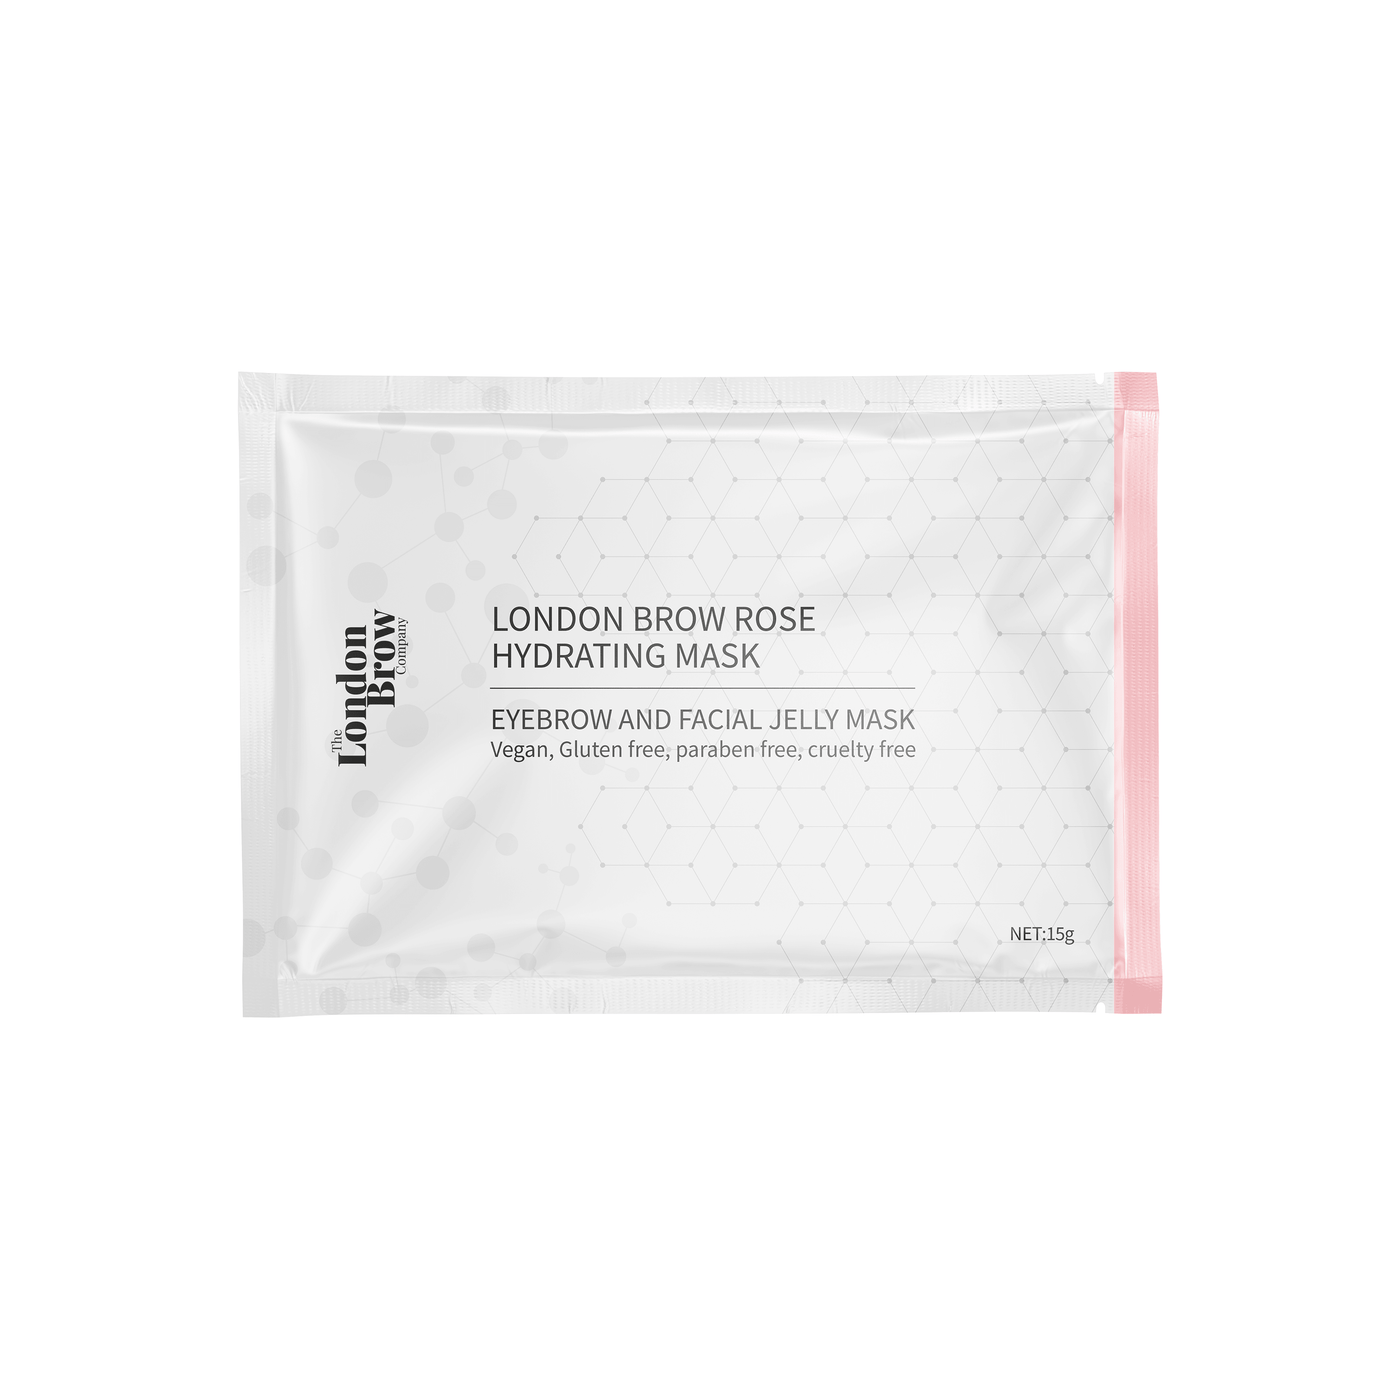 London Brow - Hydrating Brow and Face Hydro Jelly Mask - Egyptian Rose - The London Brow Company